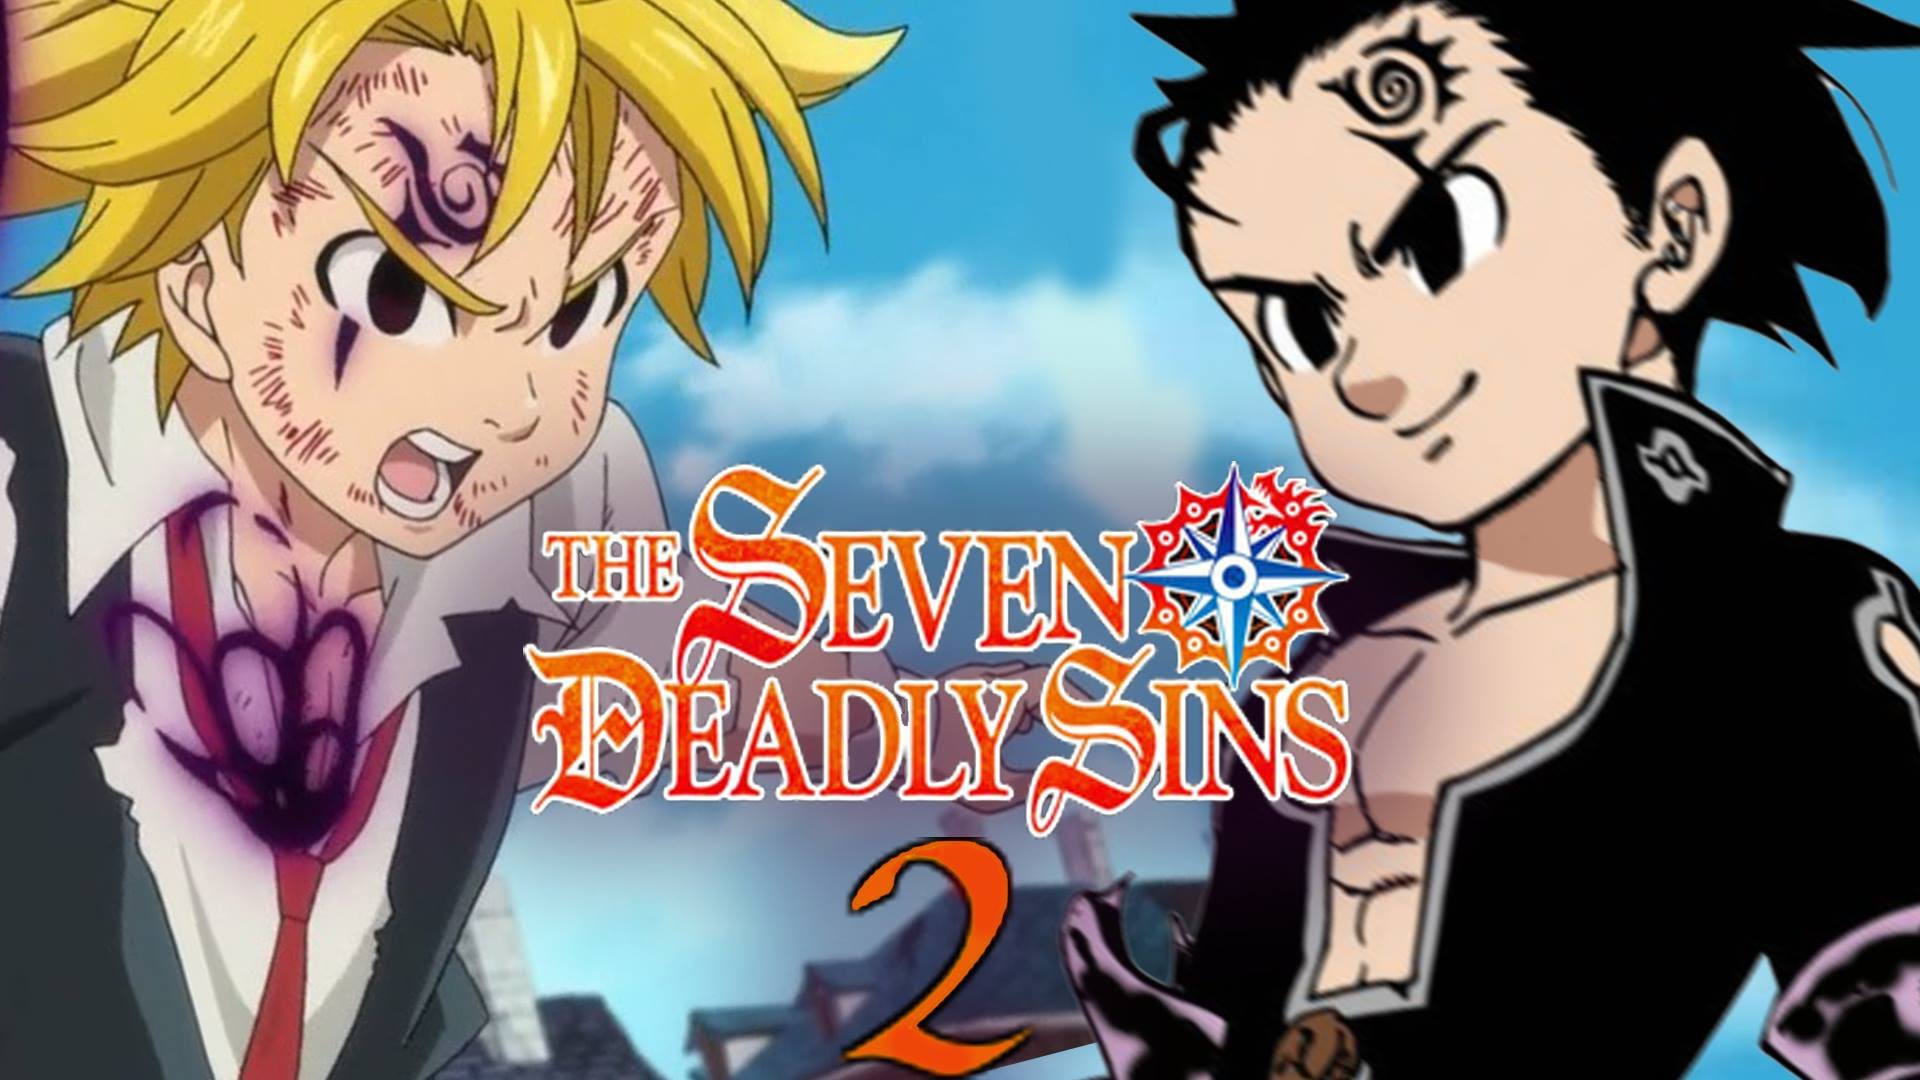 Nice Images Collection: The Seven Deadly Sins Desktop Wallpapers